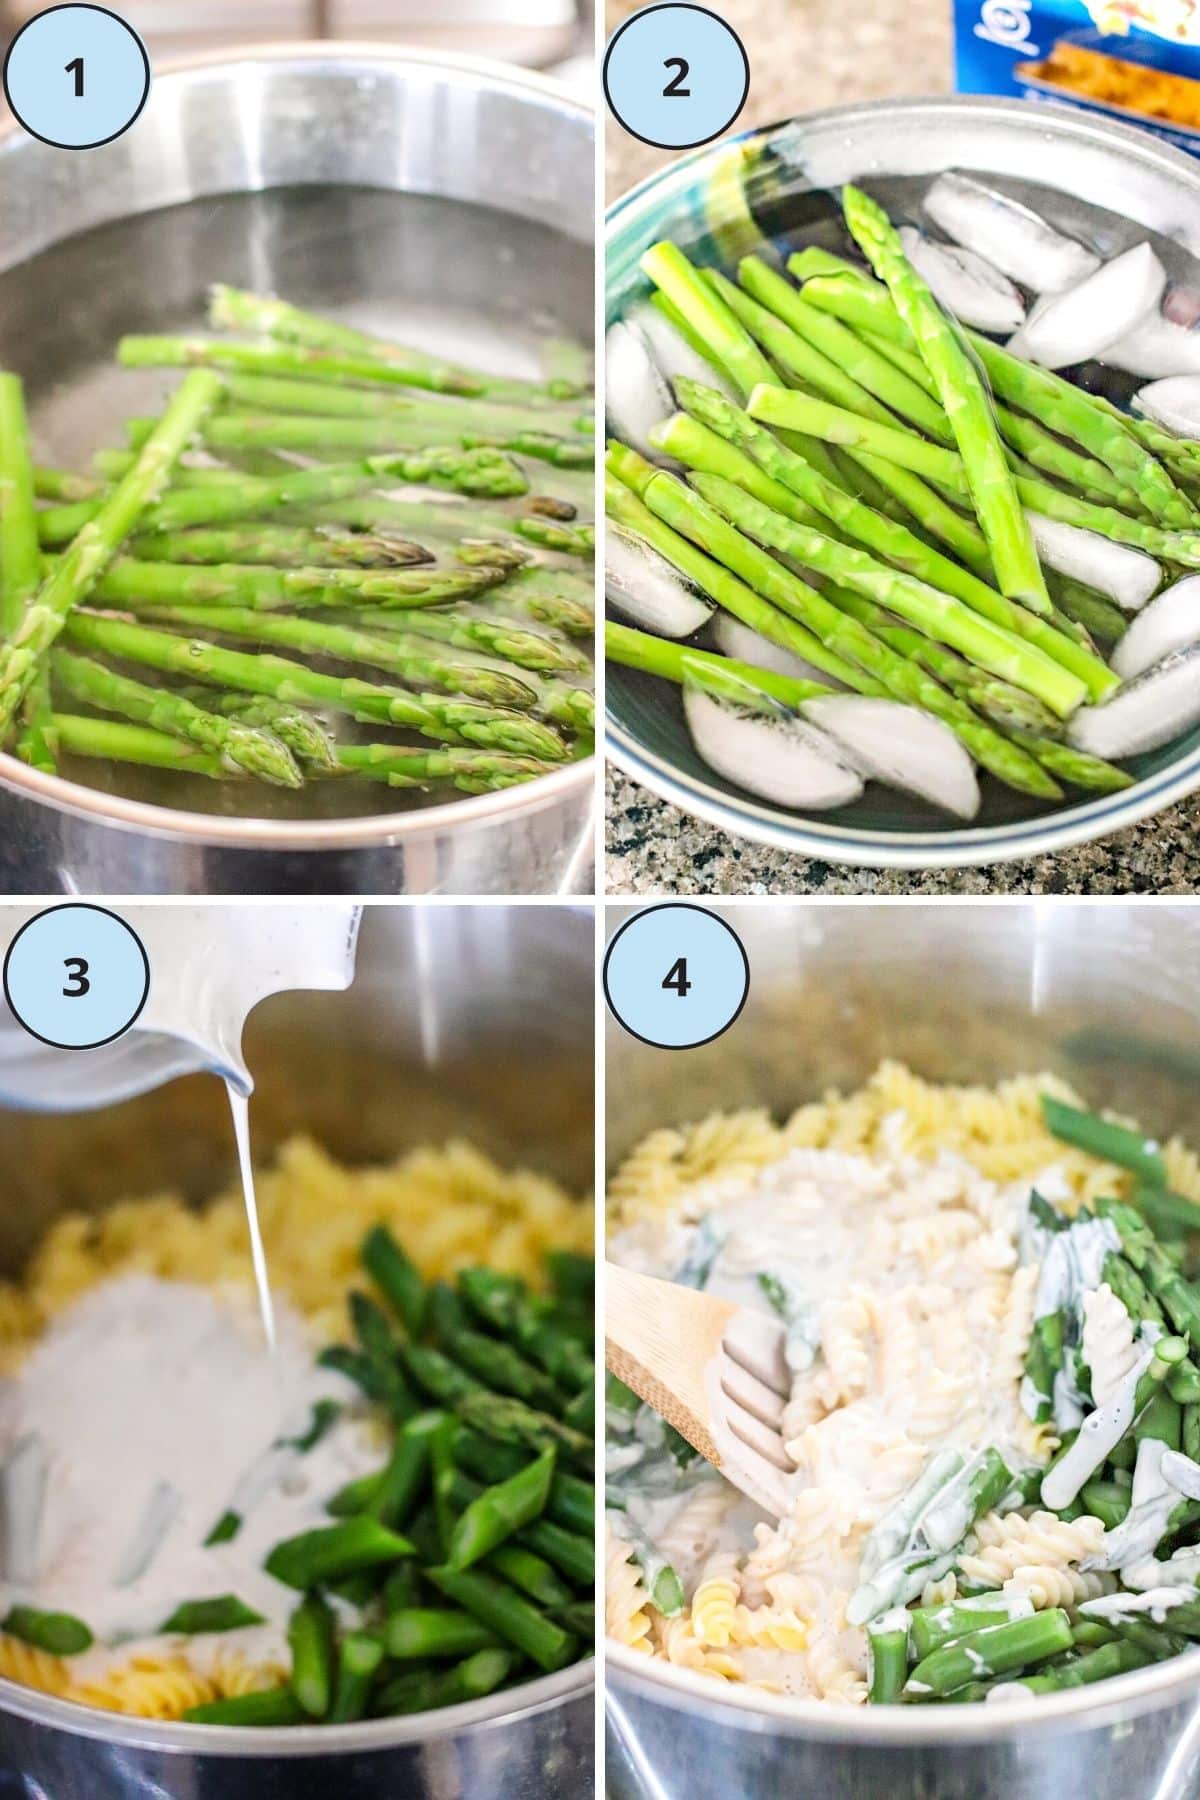 Collage of 4 images demonstrating the steps for making this recipe